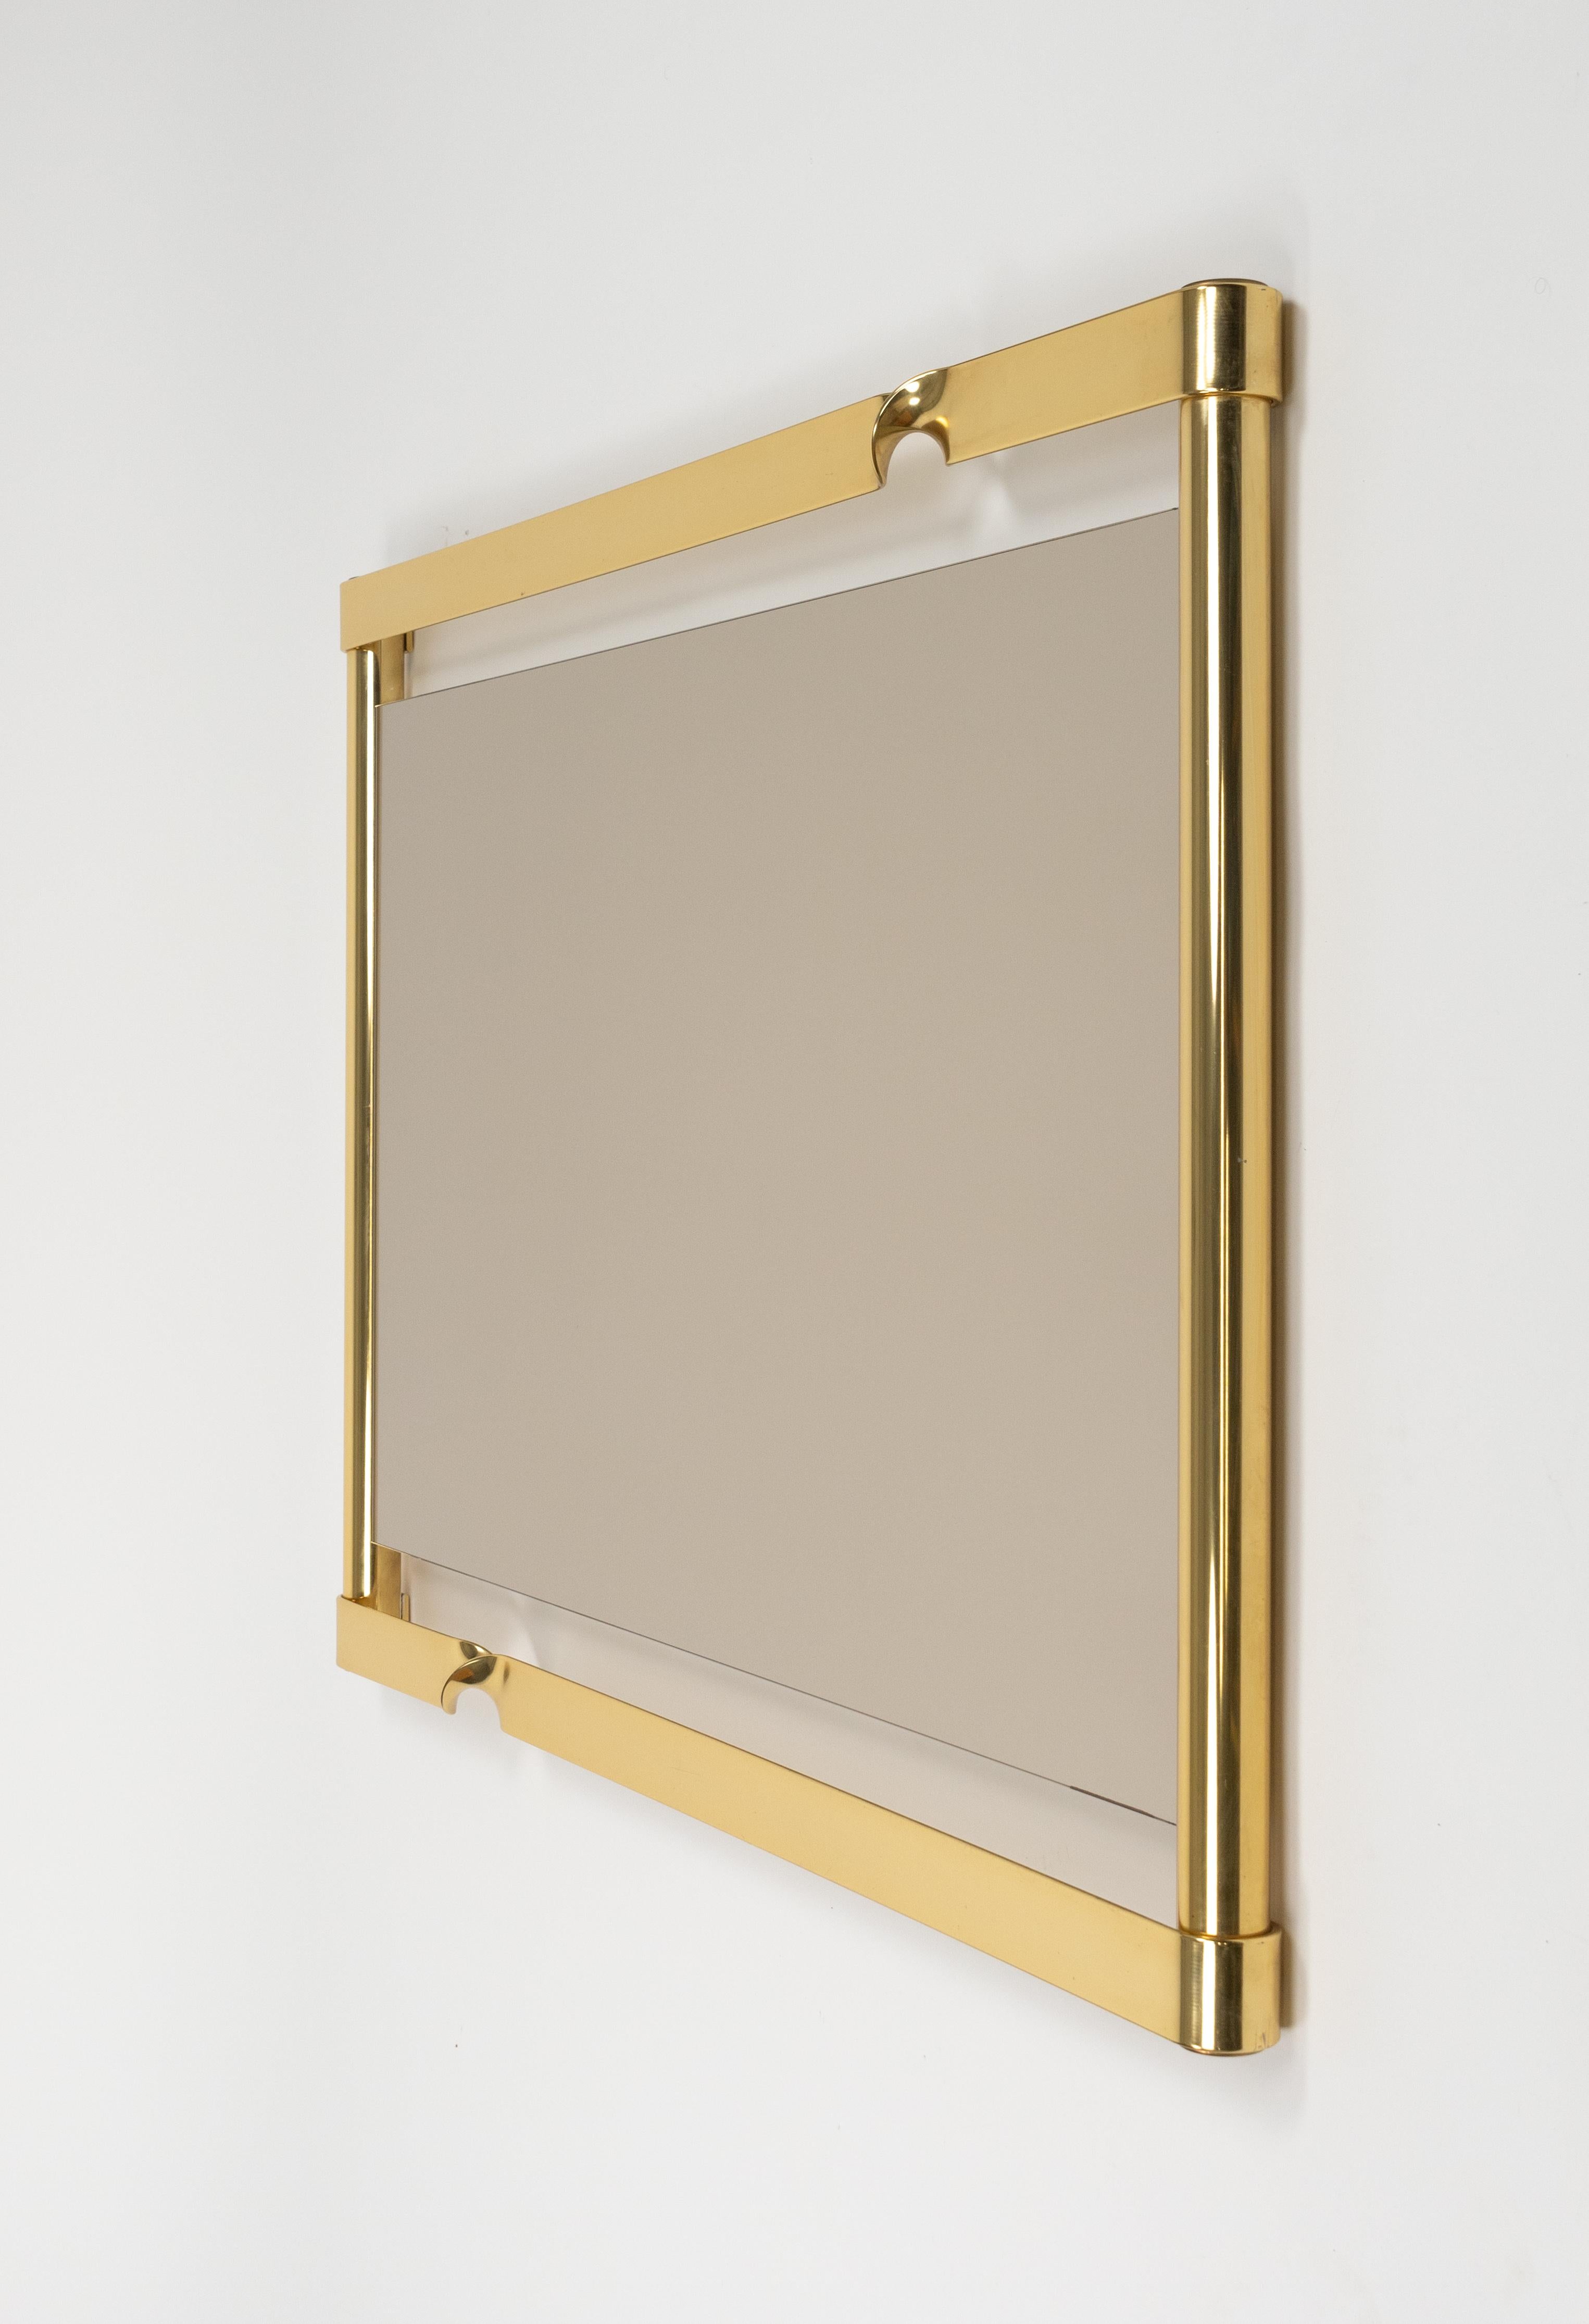 Midcentury Wall Mirror with Golden Twisted by Luciano Frigerio, Italy 1970s For Sale 2